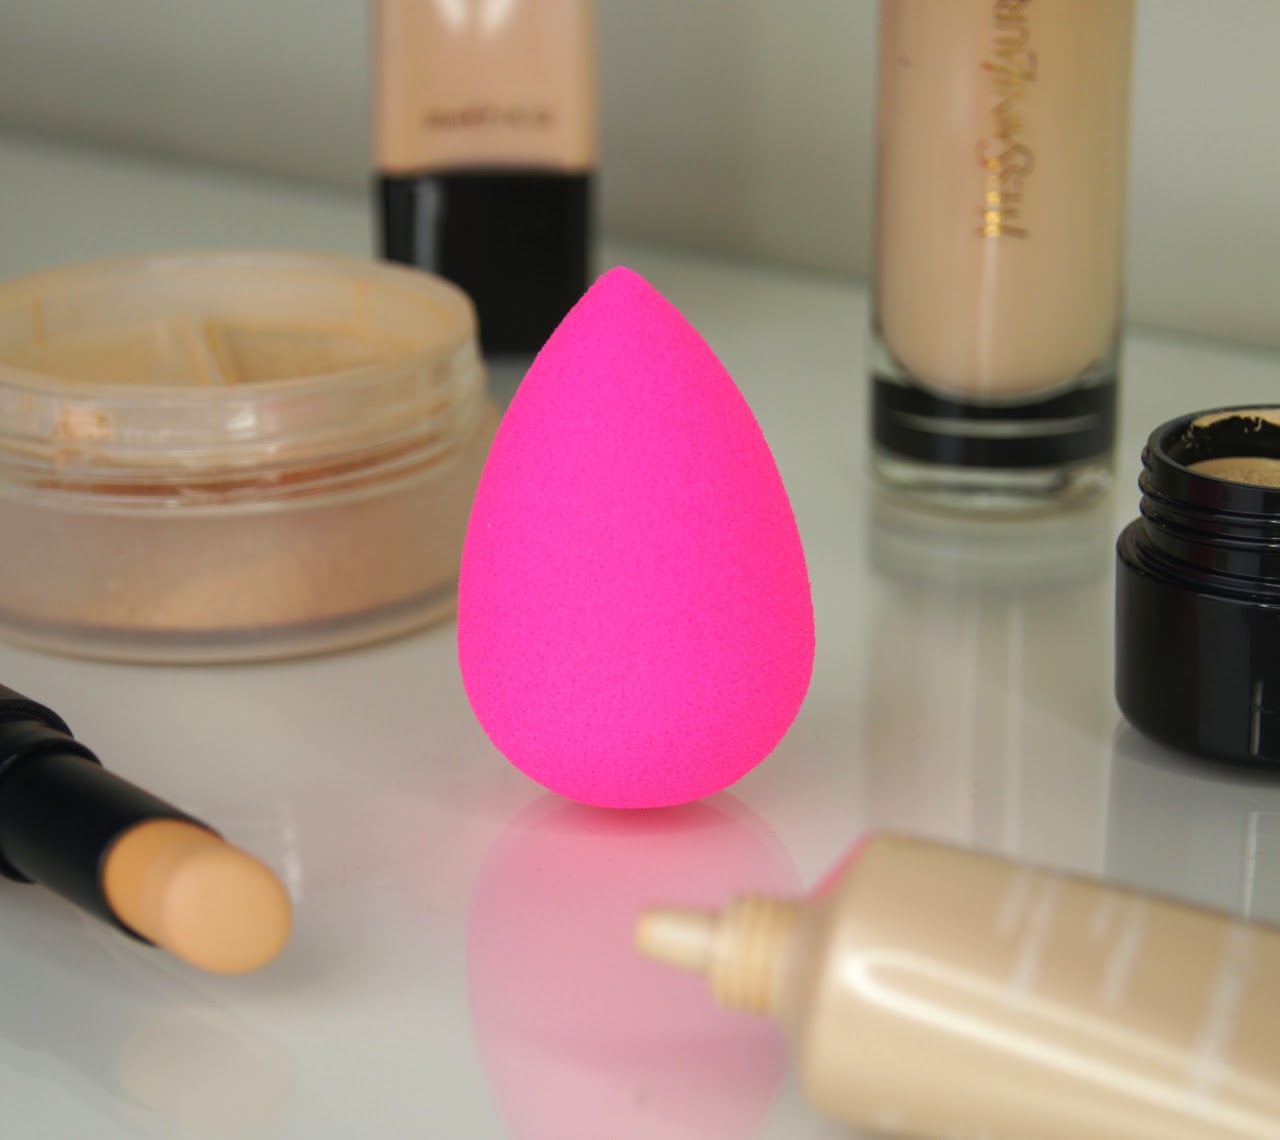 Beautyblender Review 2022 - Does the Makeup Sponge Actually Work?